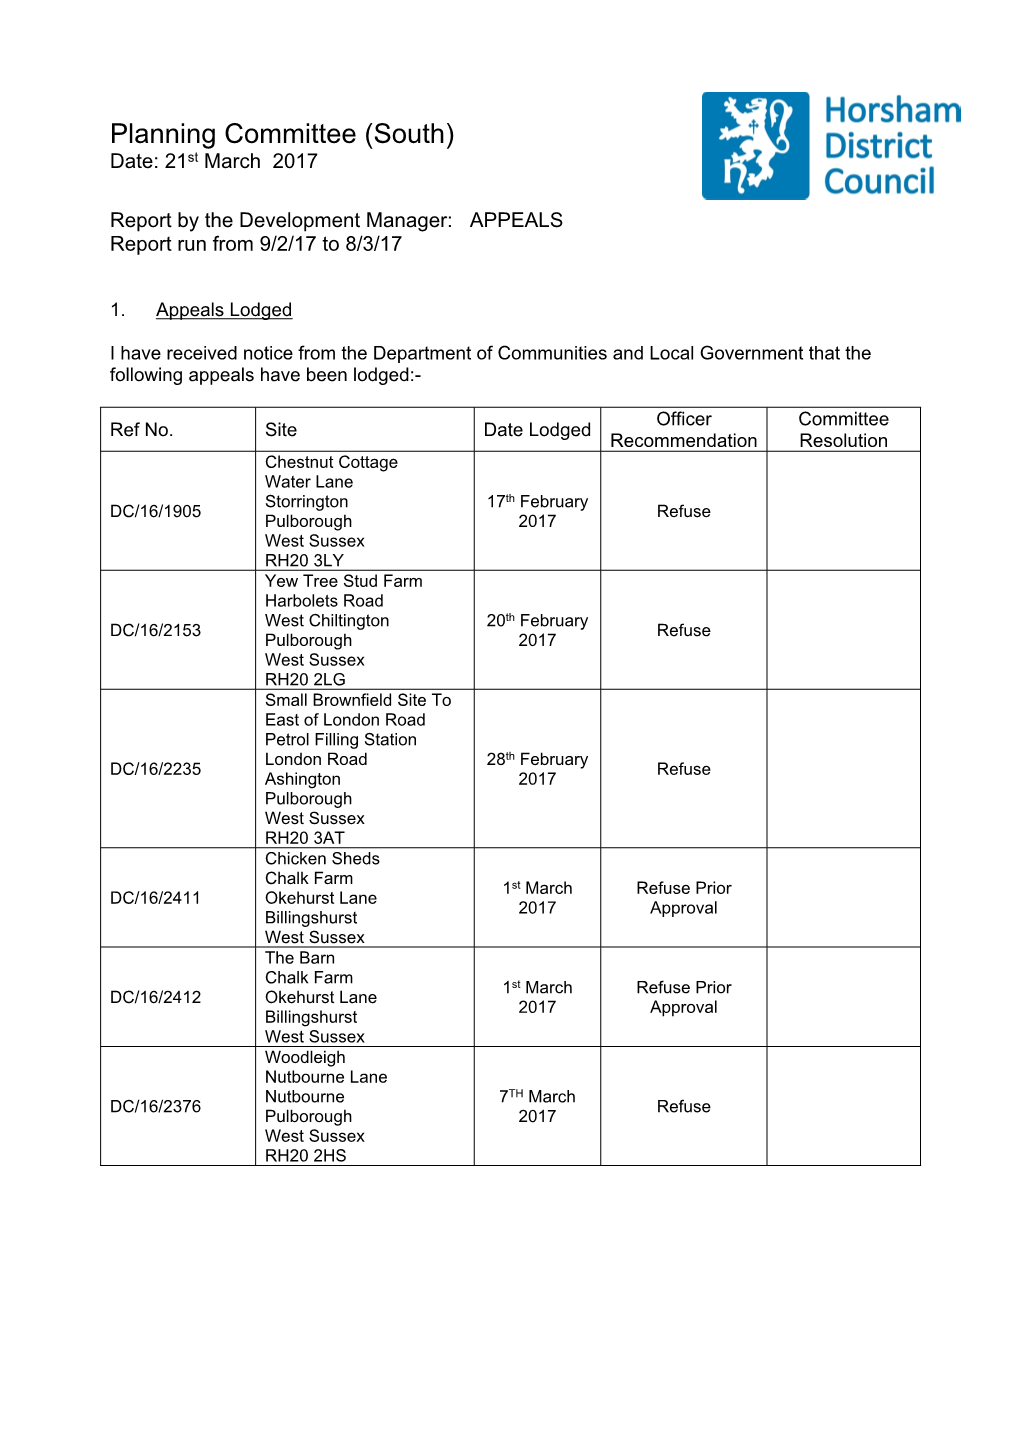 Planning Committee (South) Date: 21St March 2017